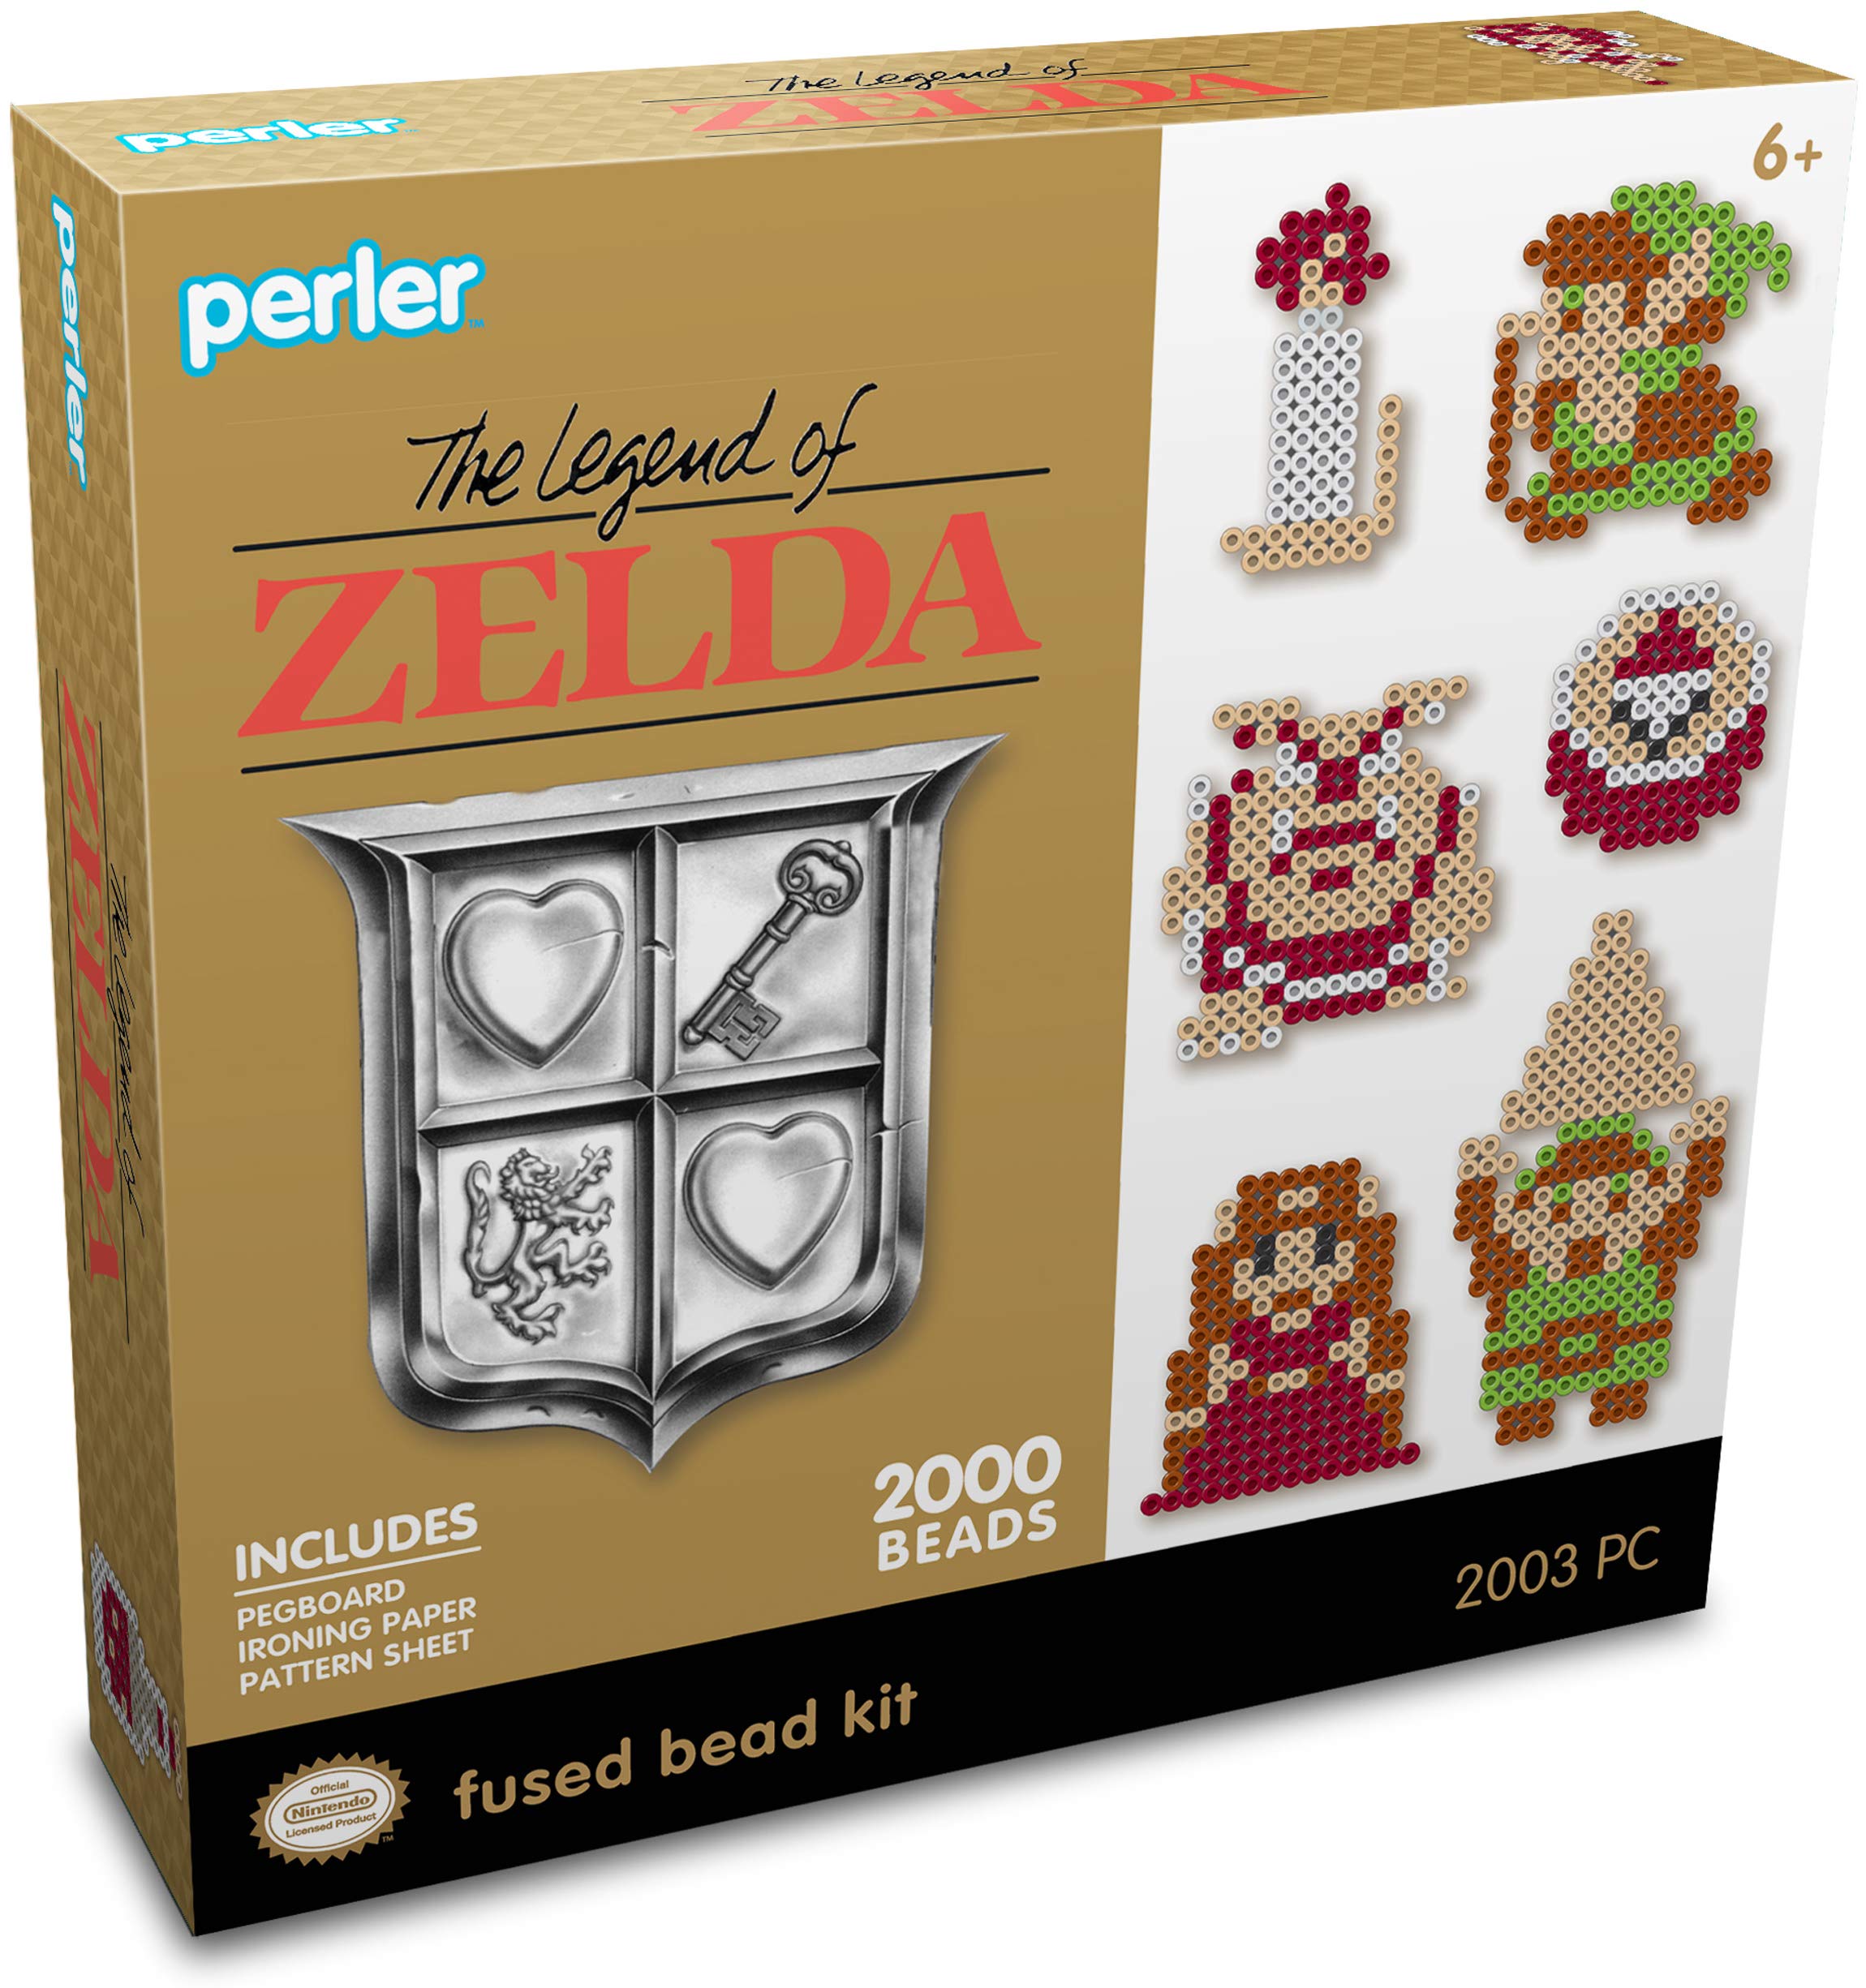 2000-Piece Perler Beads Legend of Zelda Fused Bead Kit $7.30 + Free Shipping w/ Prime or on $35+